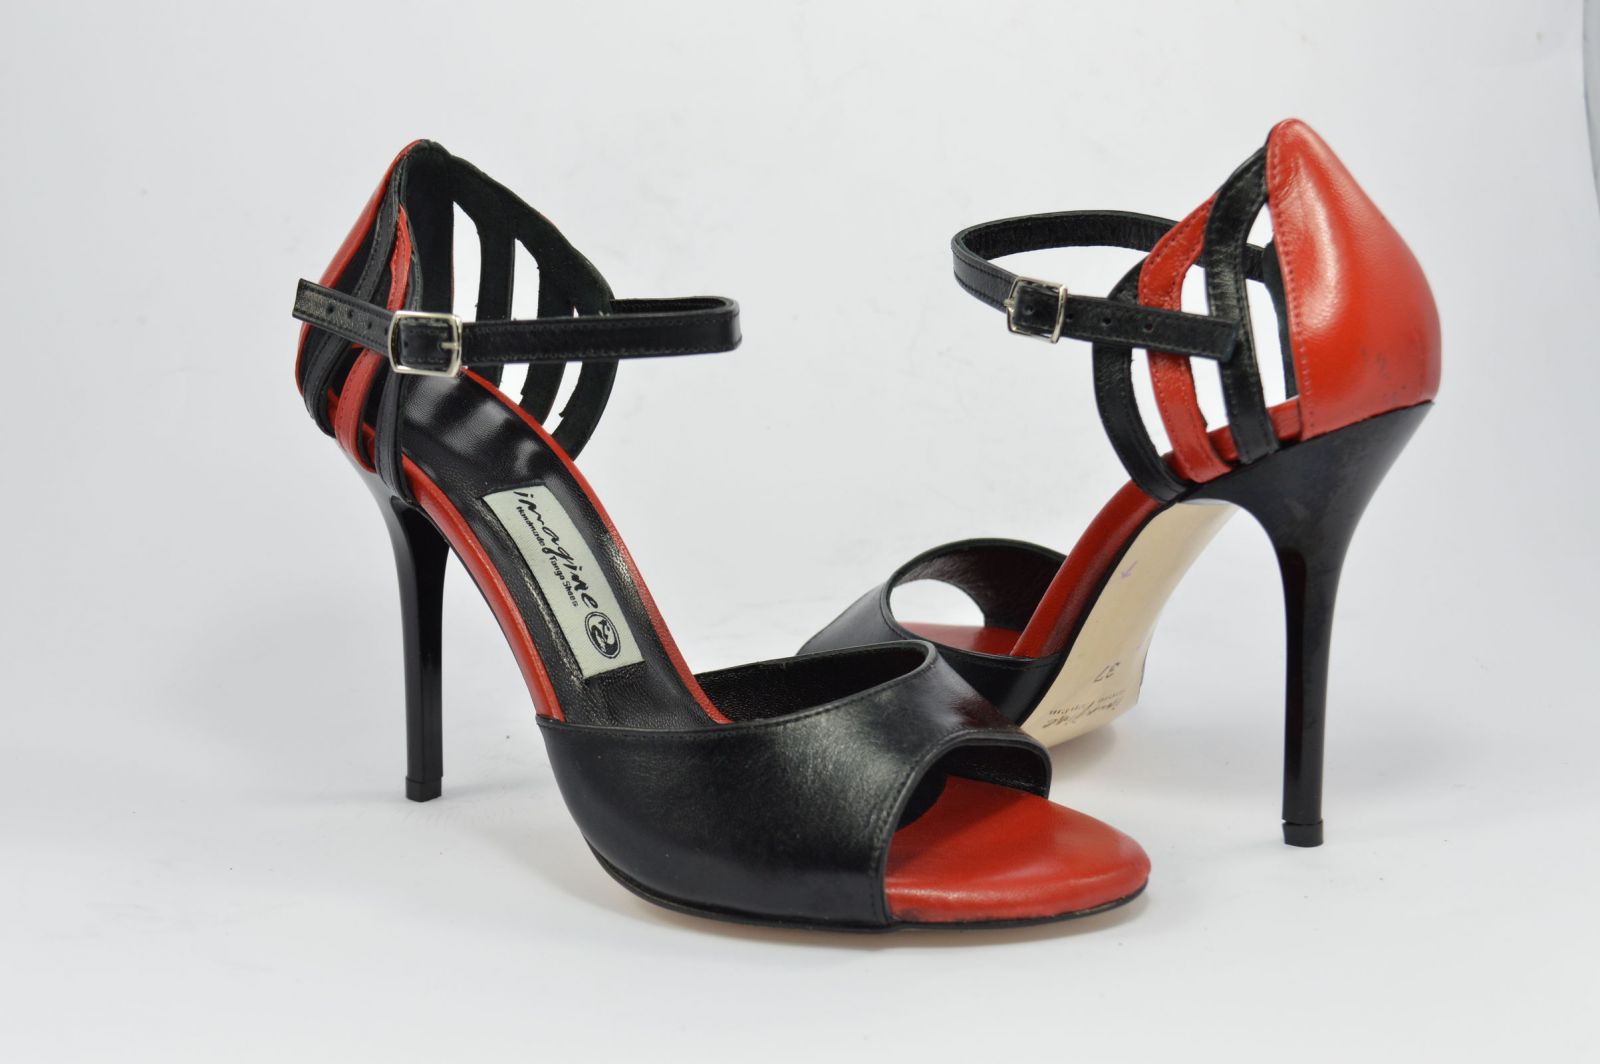 omen's tango shoe, open toe, with black and red soft leather